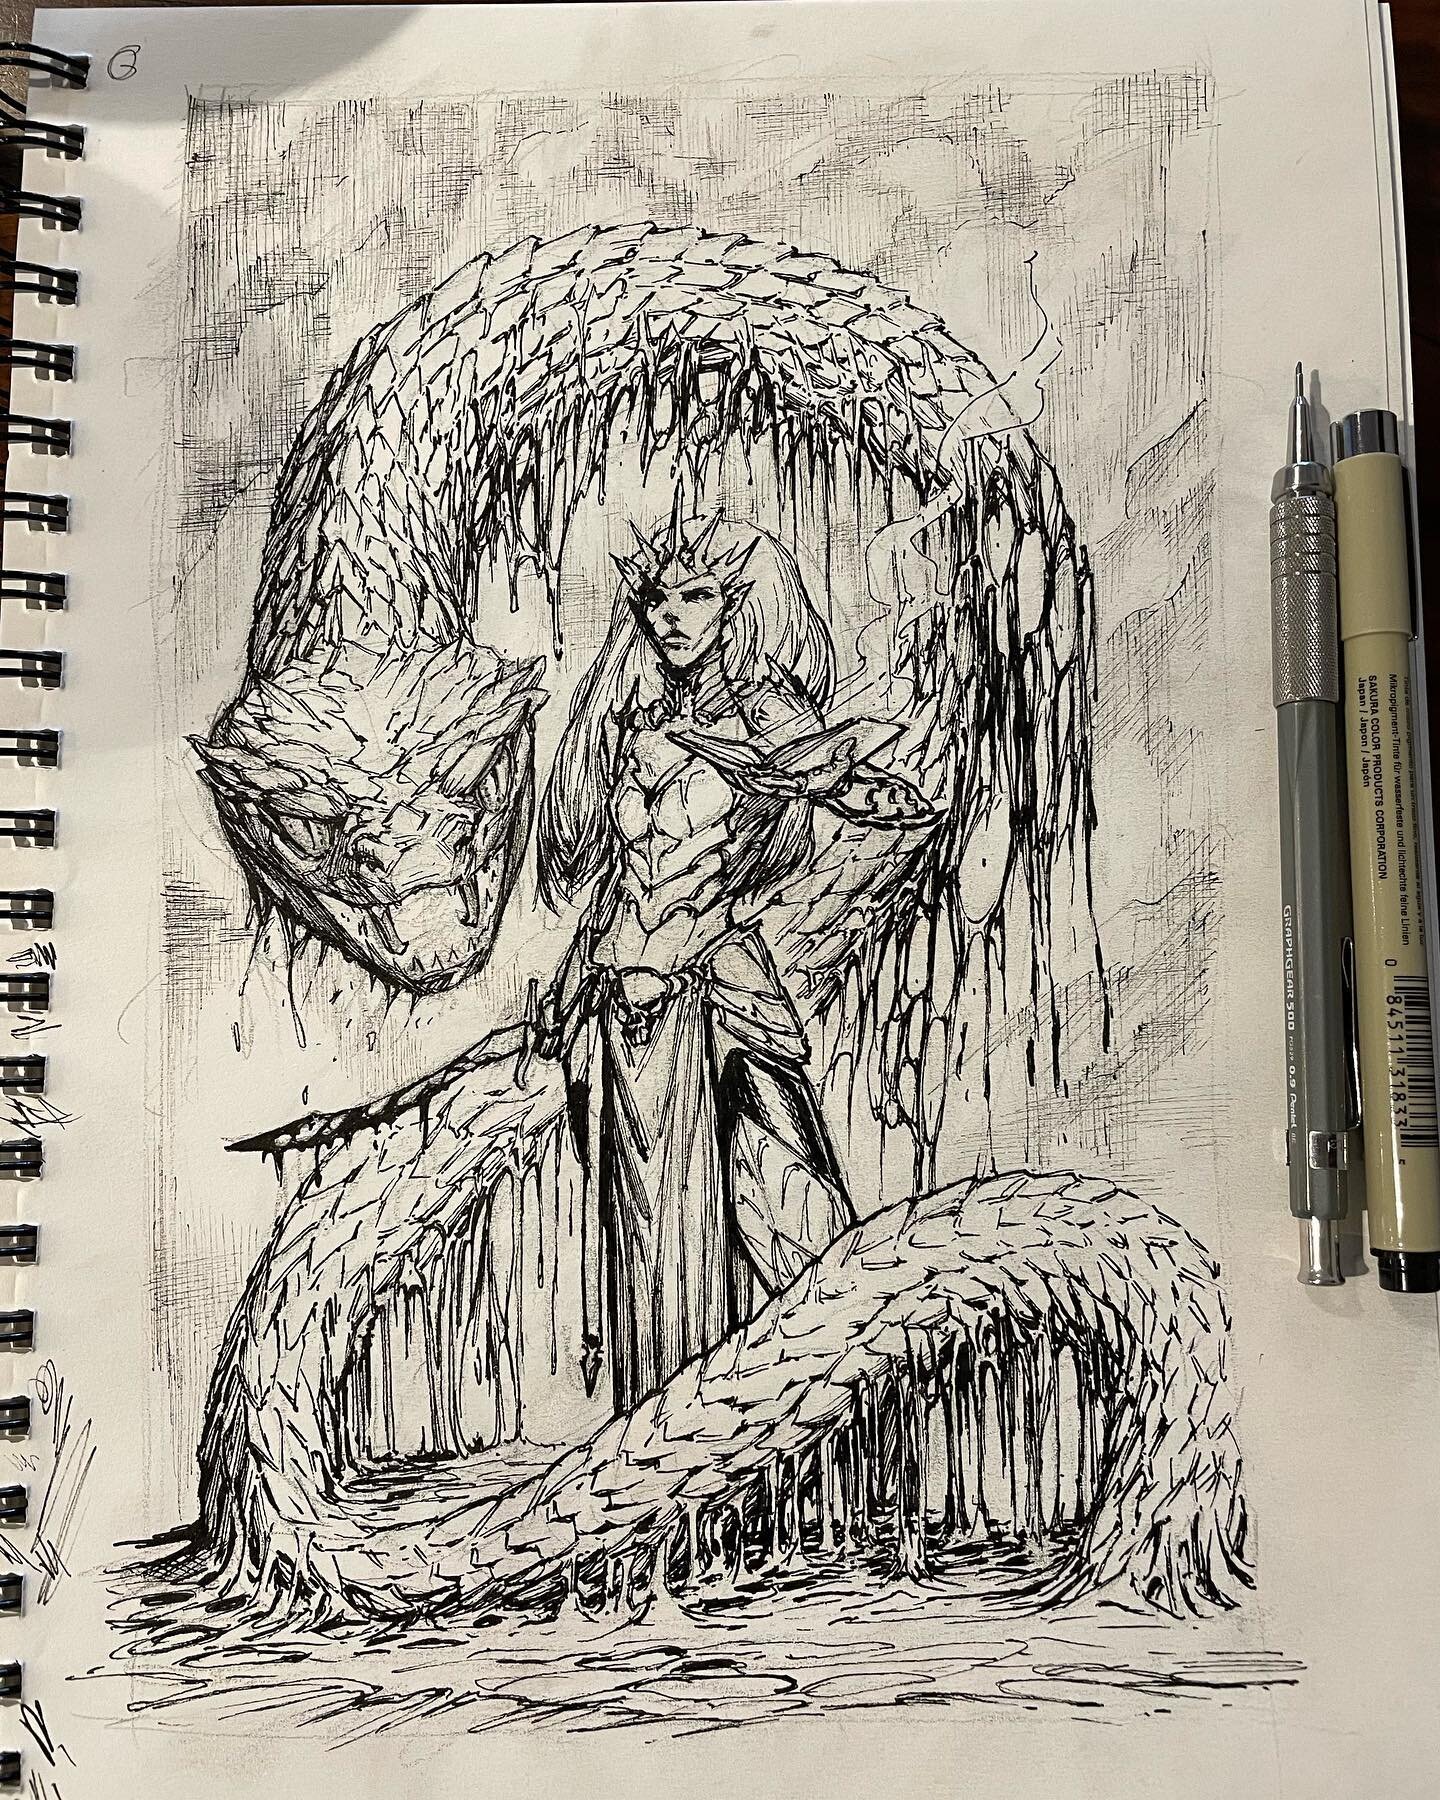 Haven&rsquo;t posted in a minute. Here&rsquo;s an evil elf lady and her magical pet snake made of blood. 
#ageofsigmar #gamesworkshop #daughtersofkhaine #drawing #sketchbook